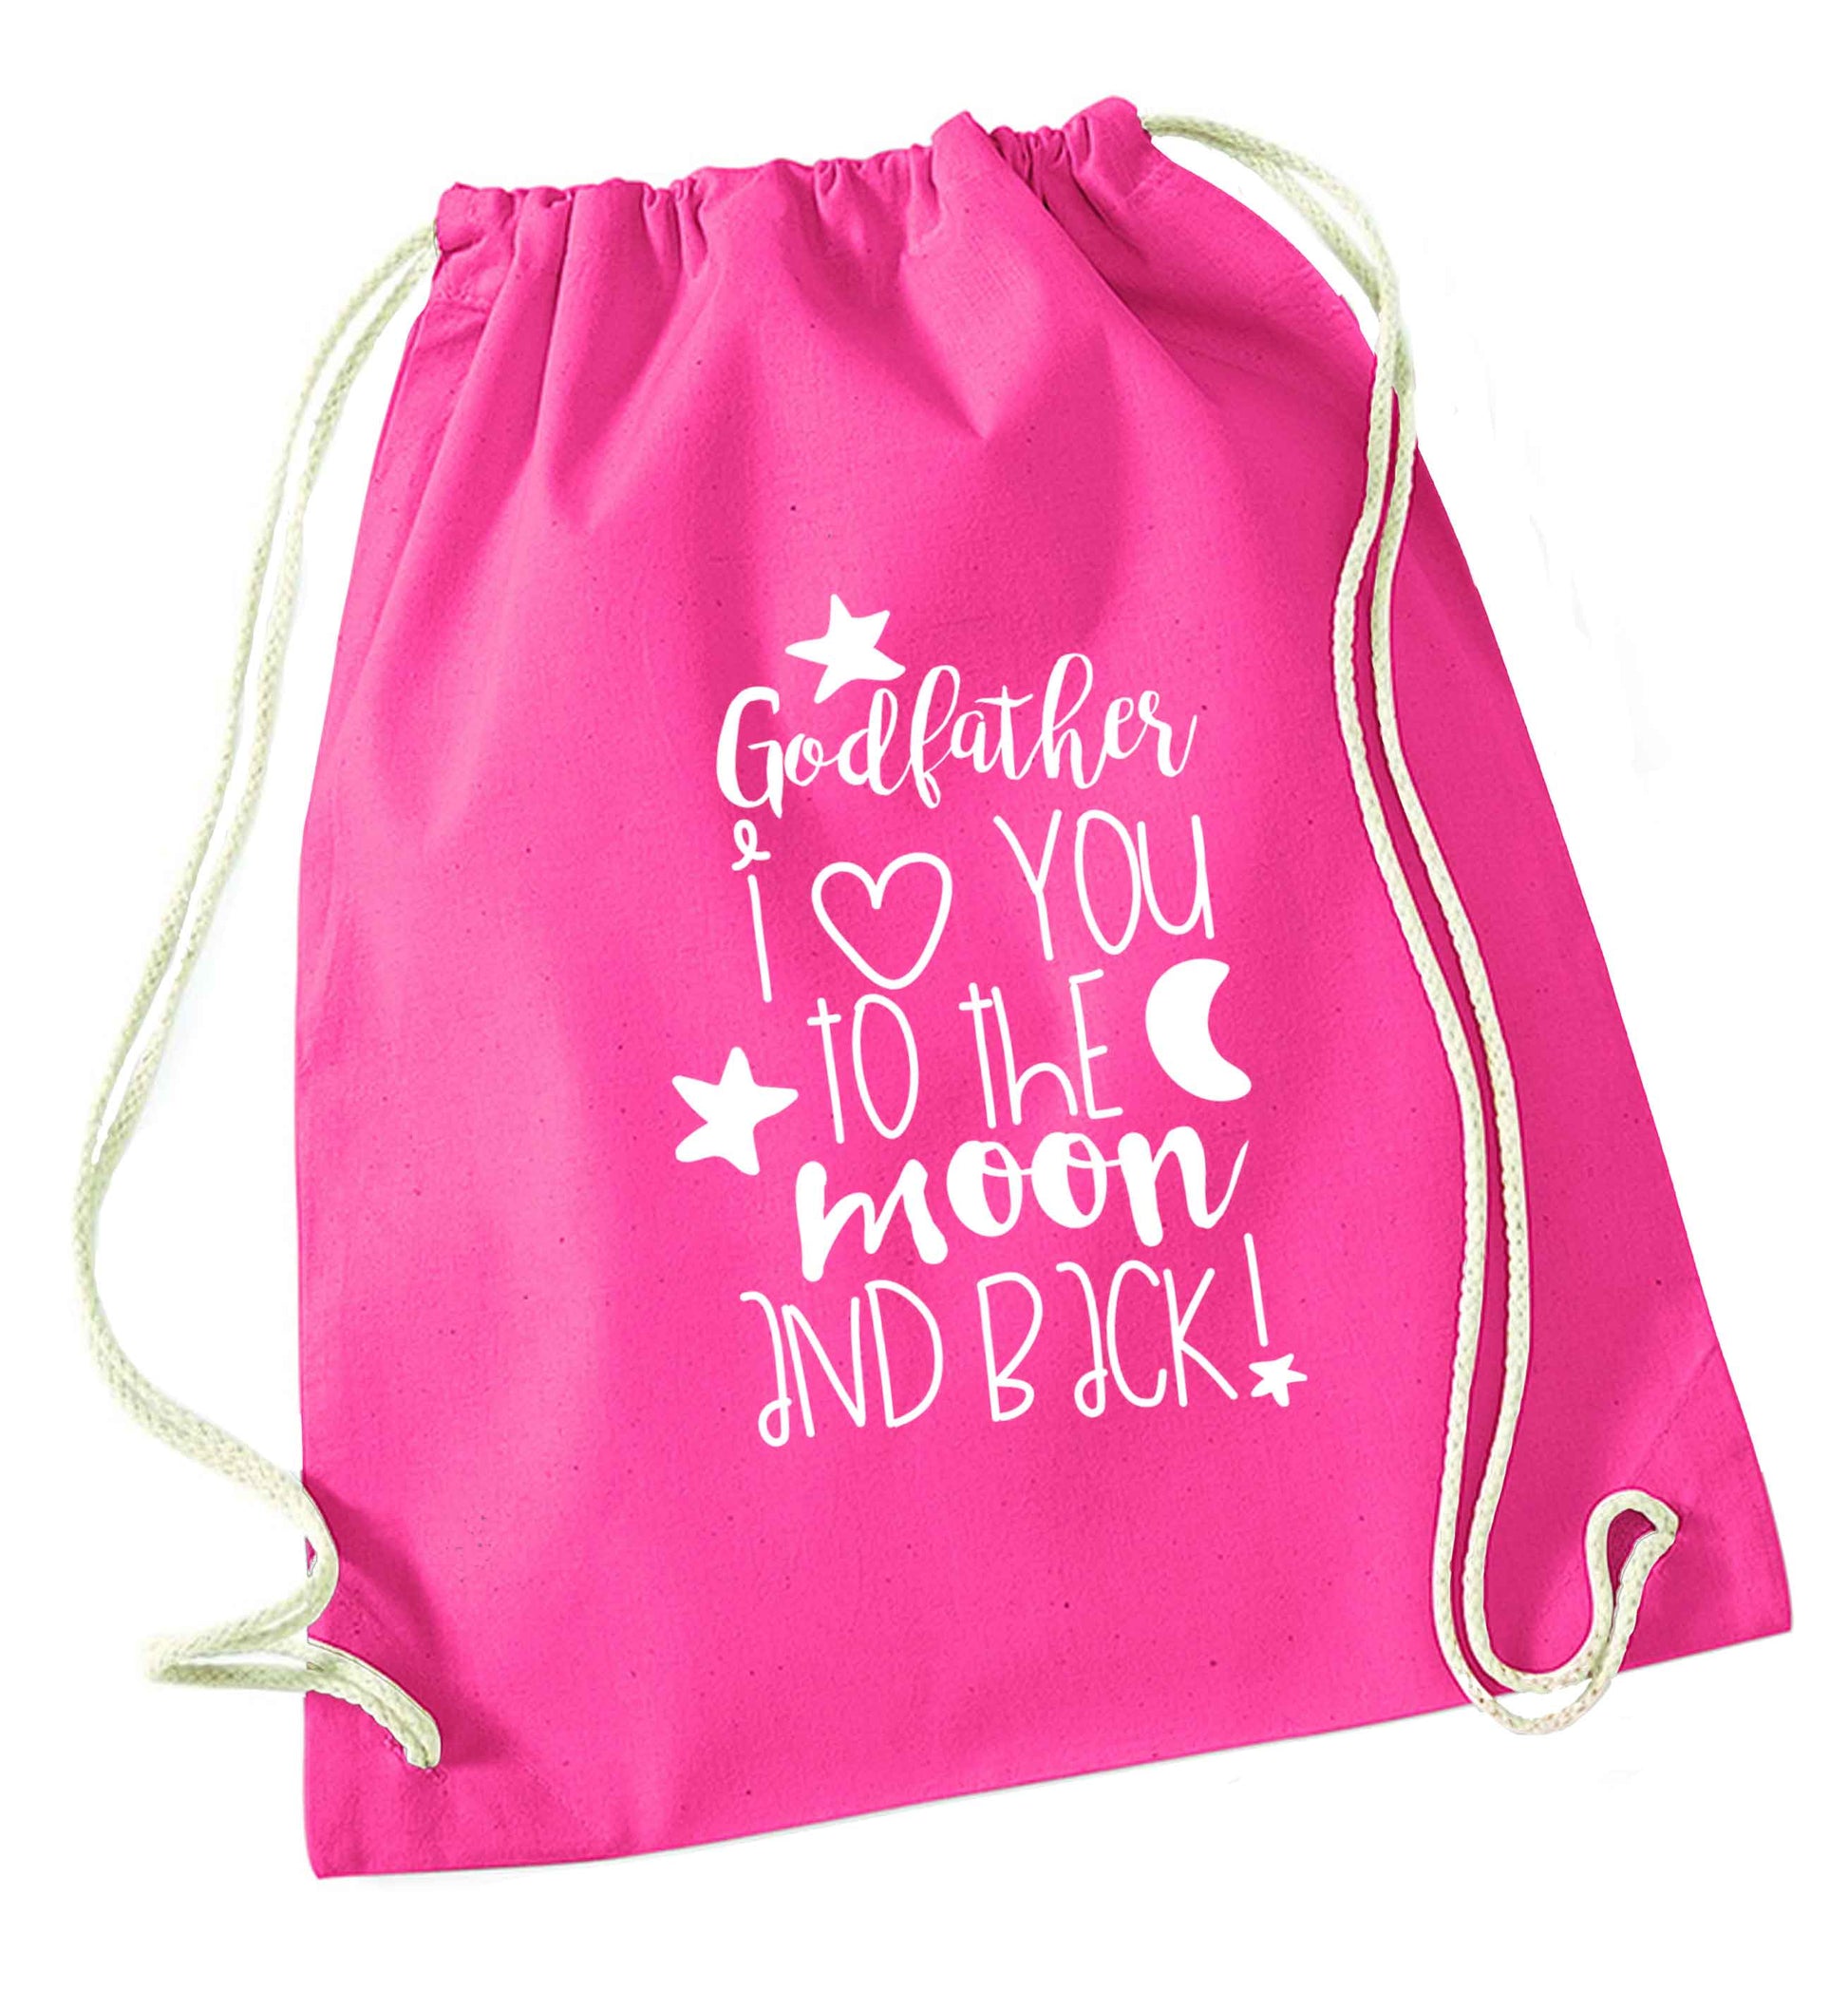 Godfather I love you to the moon and back pink drawstring bag